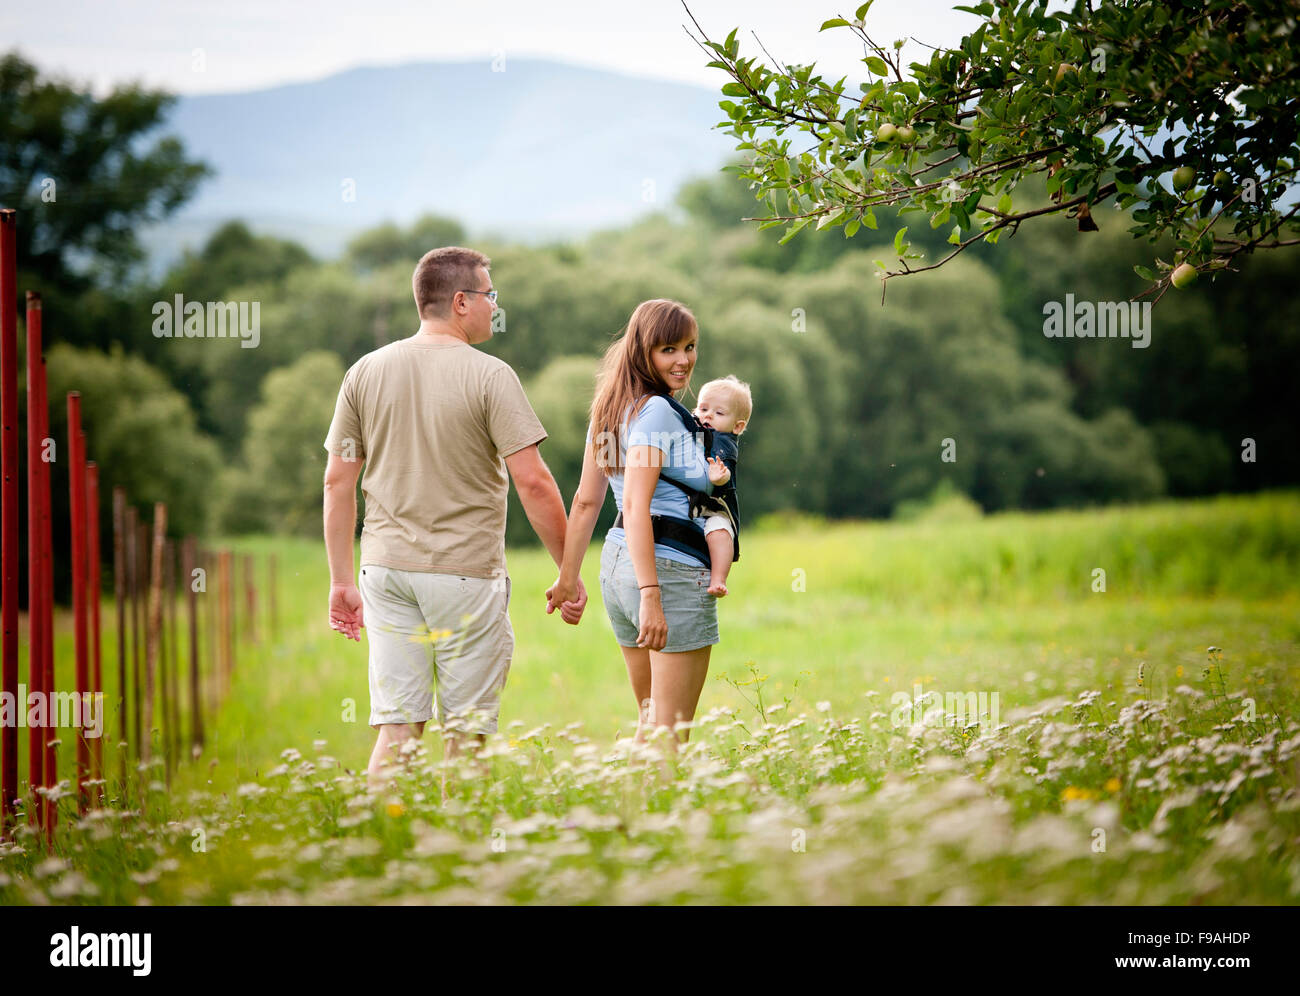 Family walking in the field with baby in the baby carrier Stock Photo